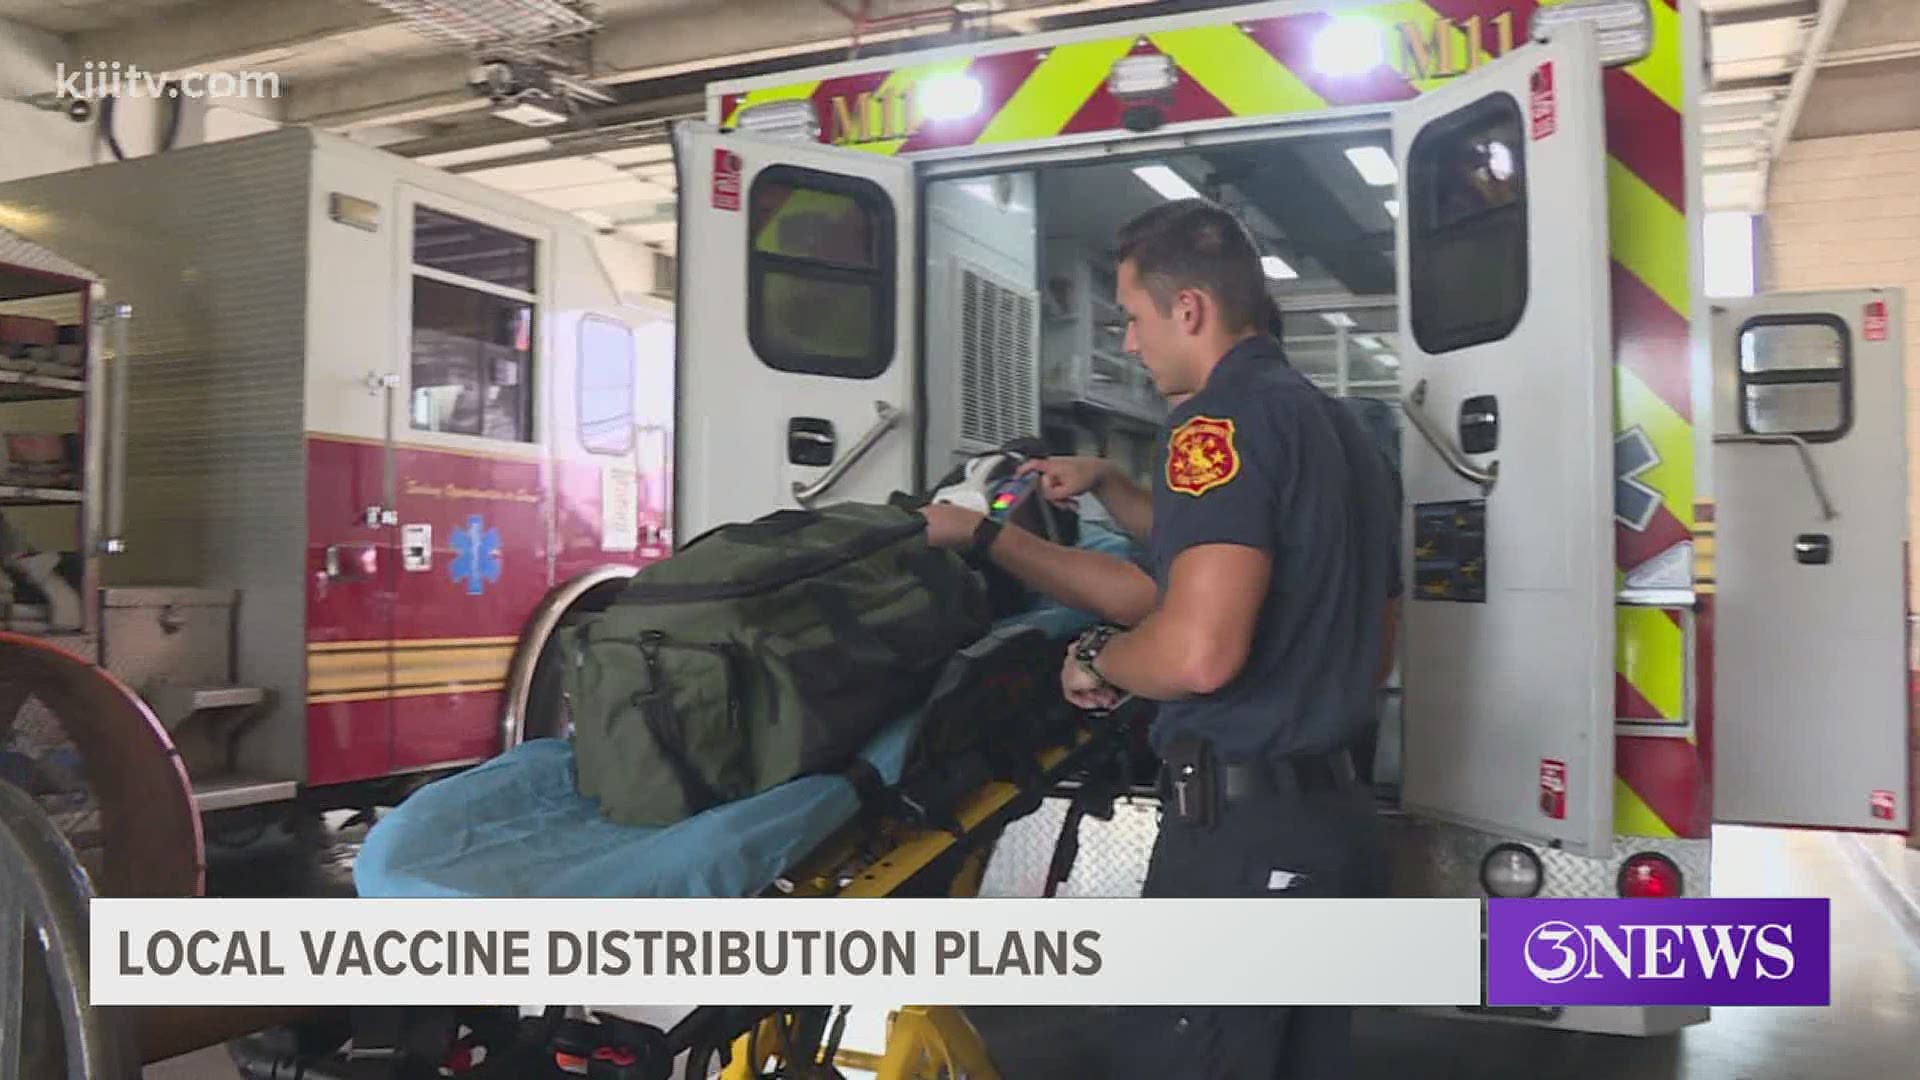 When the vaccine arrives for local distribution things could move quickly, especially for first responders.